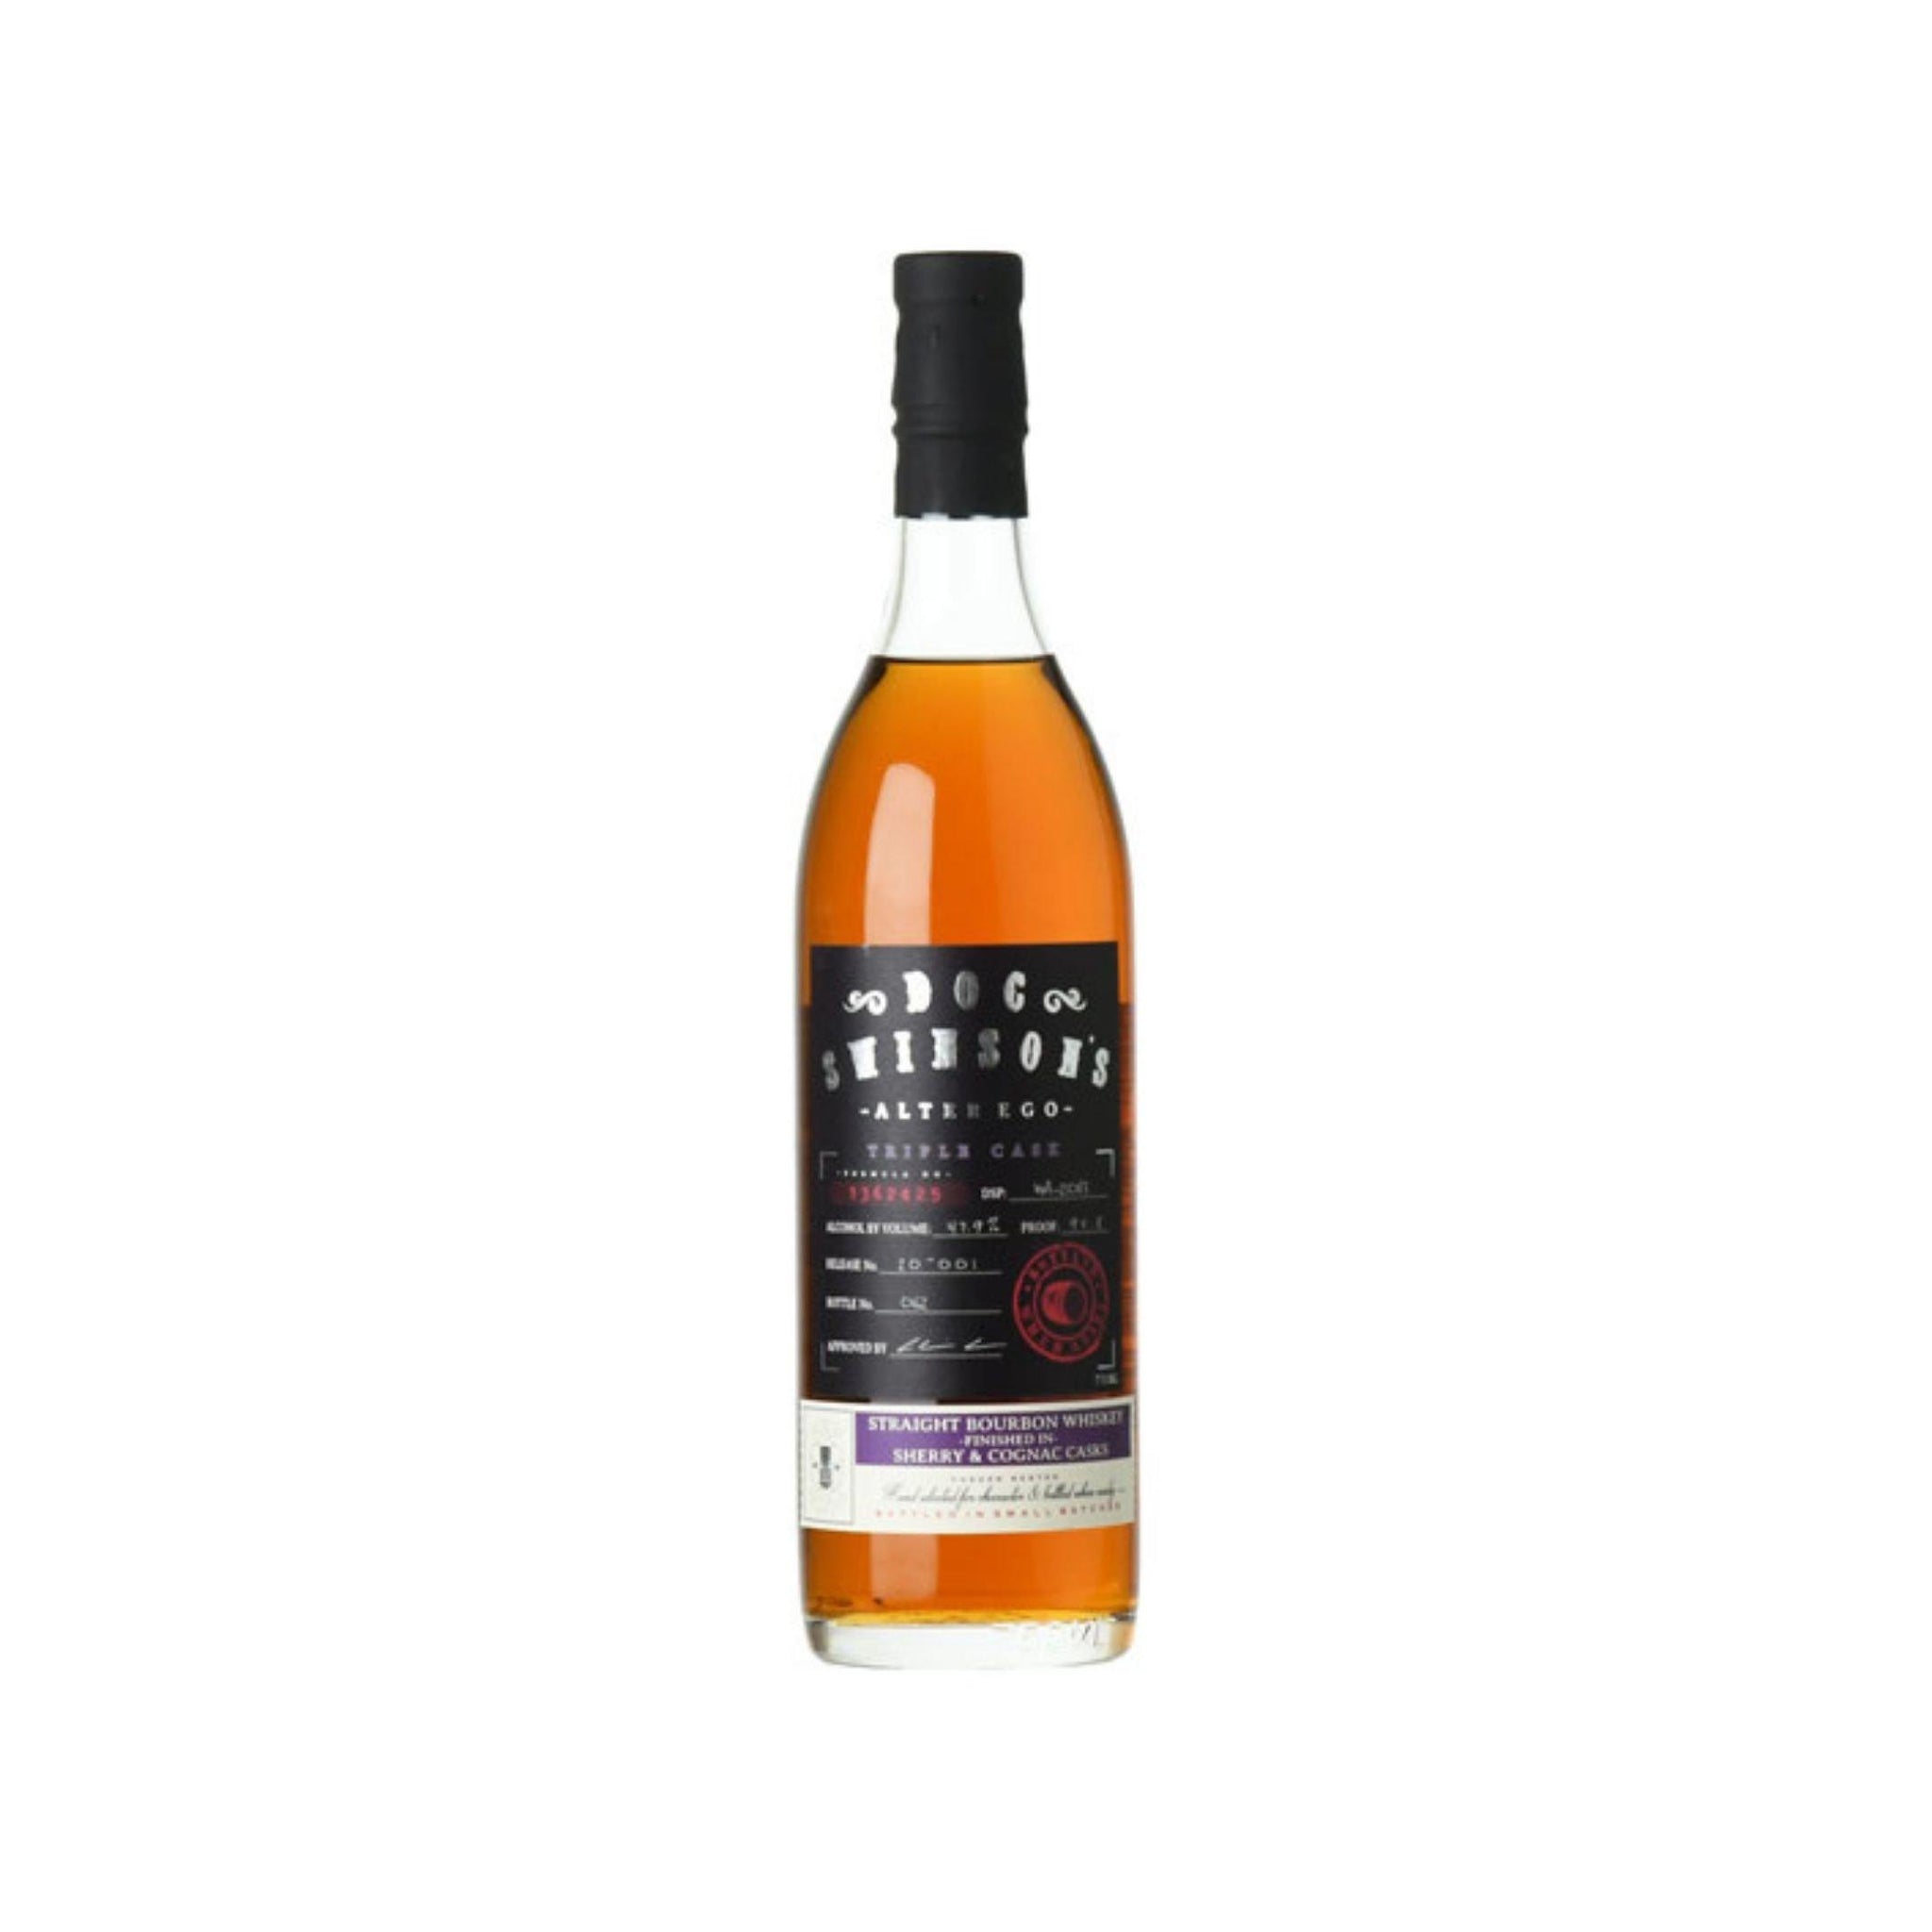 Doc Swinson's The Alter Ego Flagship Series Triple Cask Finished In Sherry And Cognac Casks Bourbon Whiskey 750ml